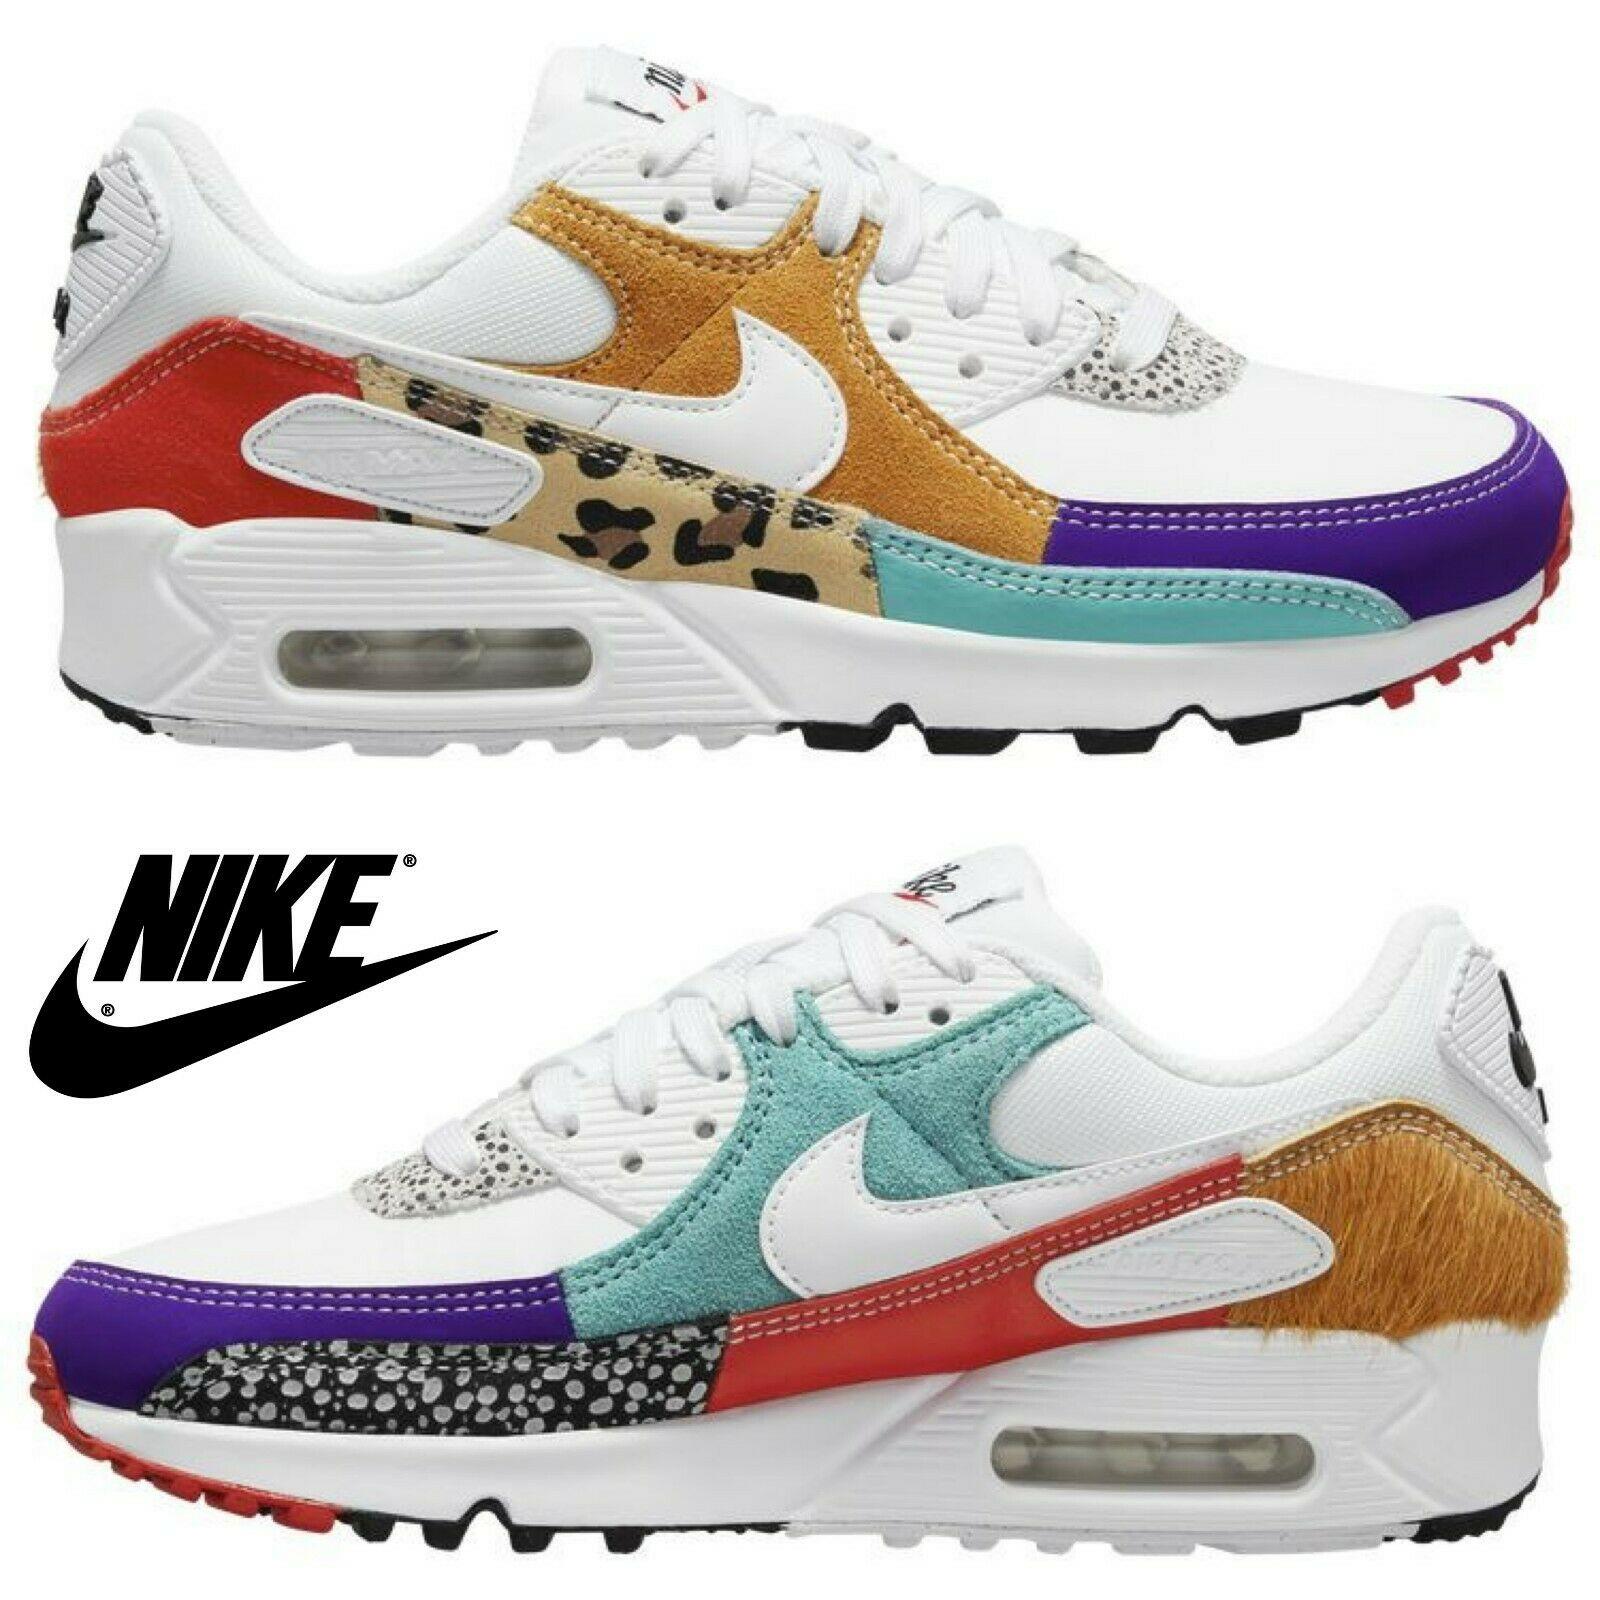 Nike Air Max 90 Women s Sneakers Casual Shoes Premium Running Sport Gym White